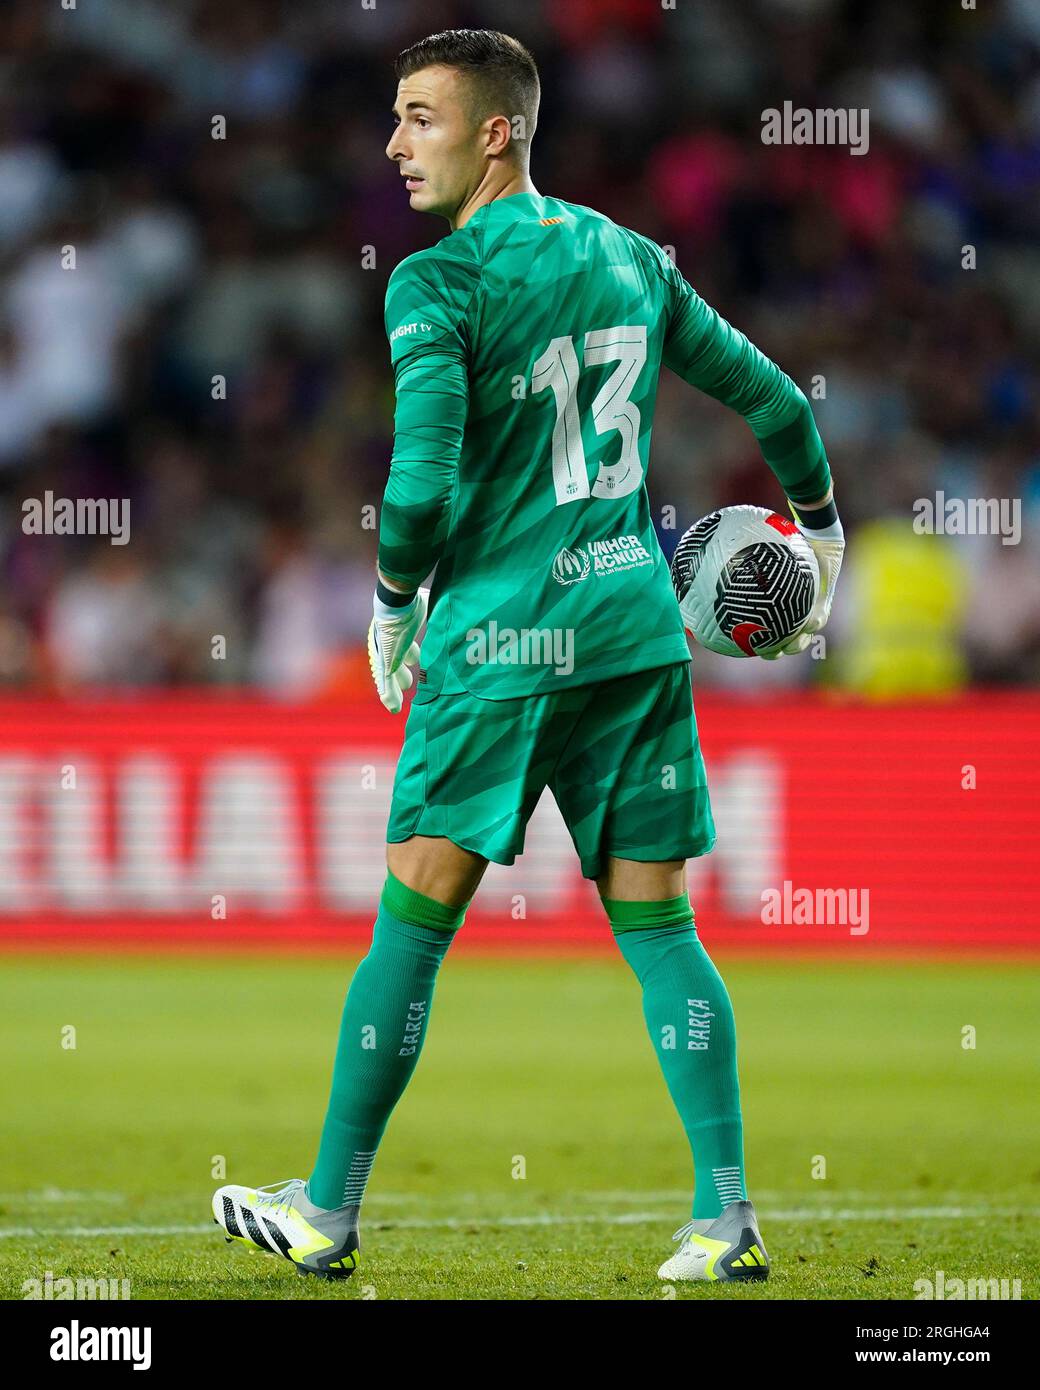 Barcelona, Spain. 08th Aug, 2023. Inaki Pena of FC Barcelona during the Pre-season friendly, Joan Gamper Trophy match between FC Barcelona and Tottenham Hotspur played at Luis Companys Stadium on August 8, 2023 in Barcelona, Spain. (Photo by Sergio Ruiz/PRESSINPHOTO) Credit: PRESSINPHOTO SPORTS AGENCY/Alamy Live News Stock Photo